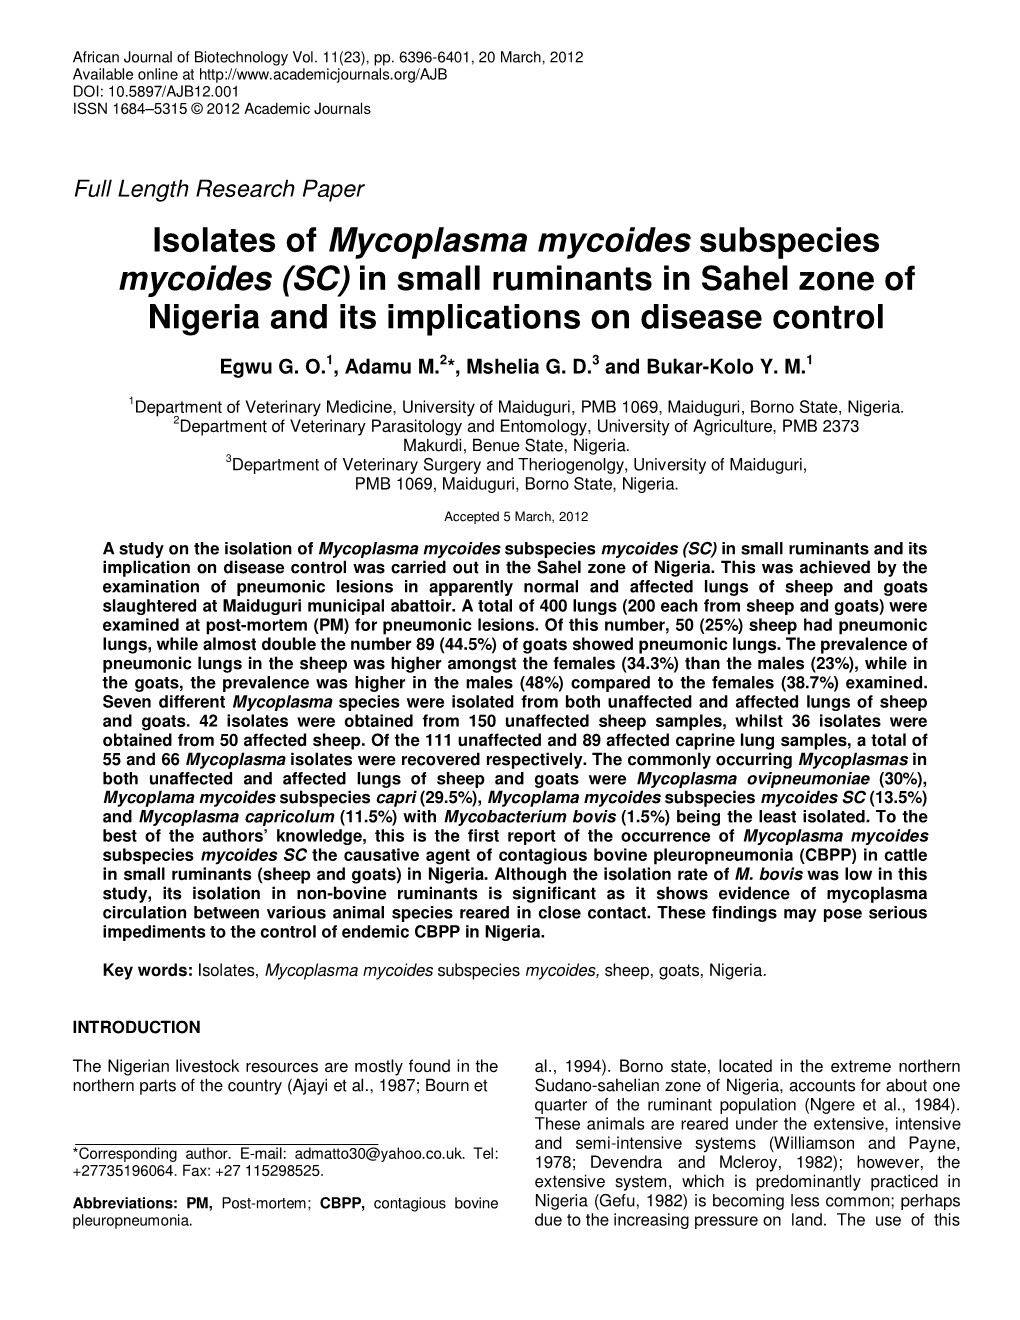 Isolates of Mycoplasma Mycoides Subspecies Mycoides (SC) in Small Ruminants in Sahel Zone of Nigeria and Its Implications on Disease Control